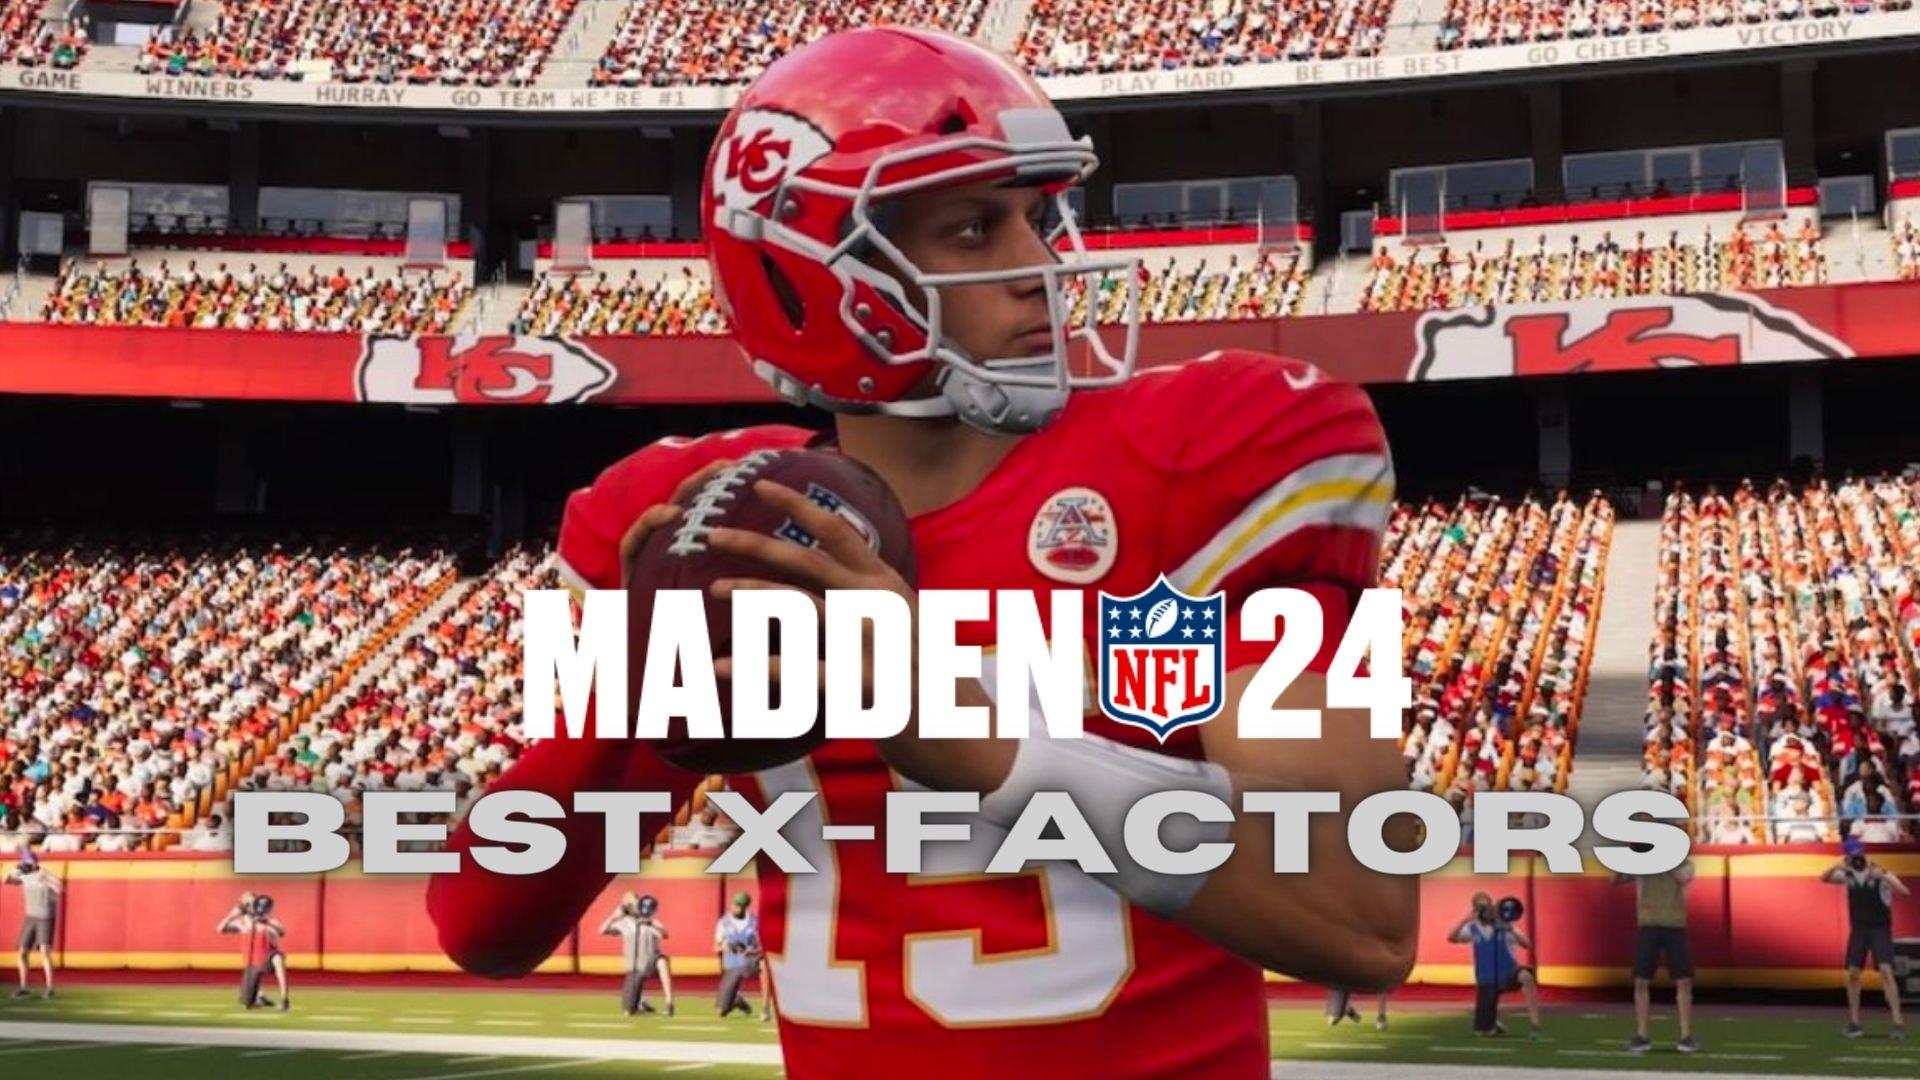 Patrick Mahomes in Red Kansas City Chiefs jersey looking to pass in Madden